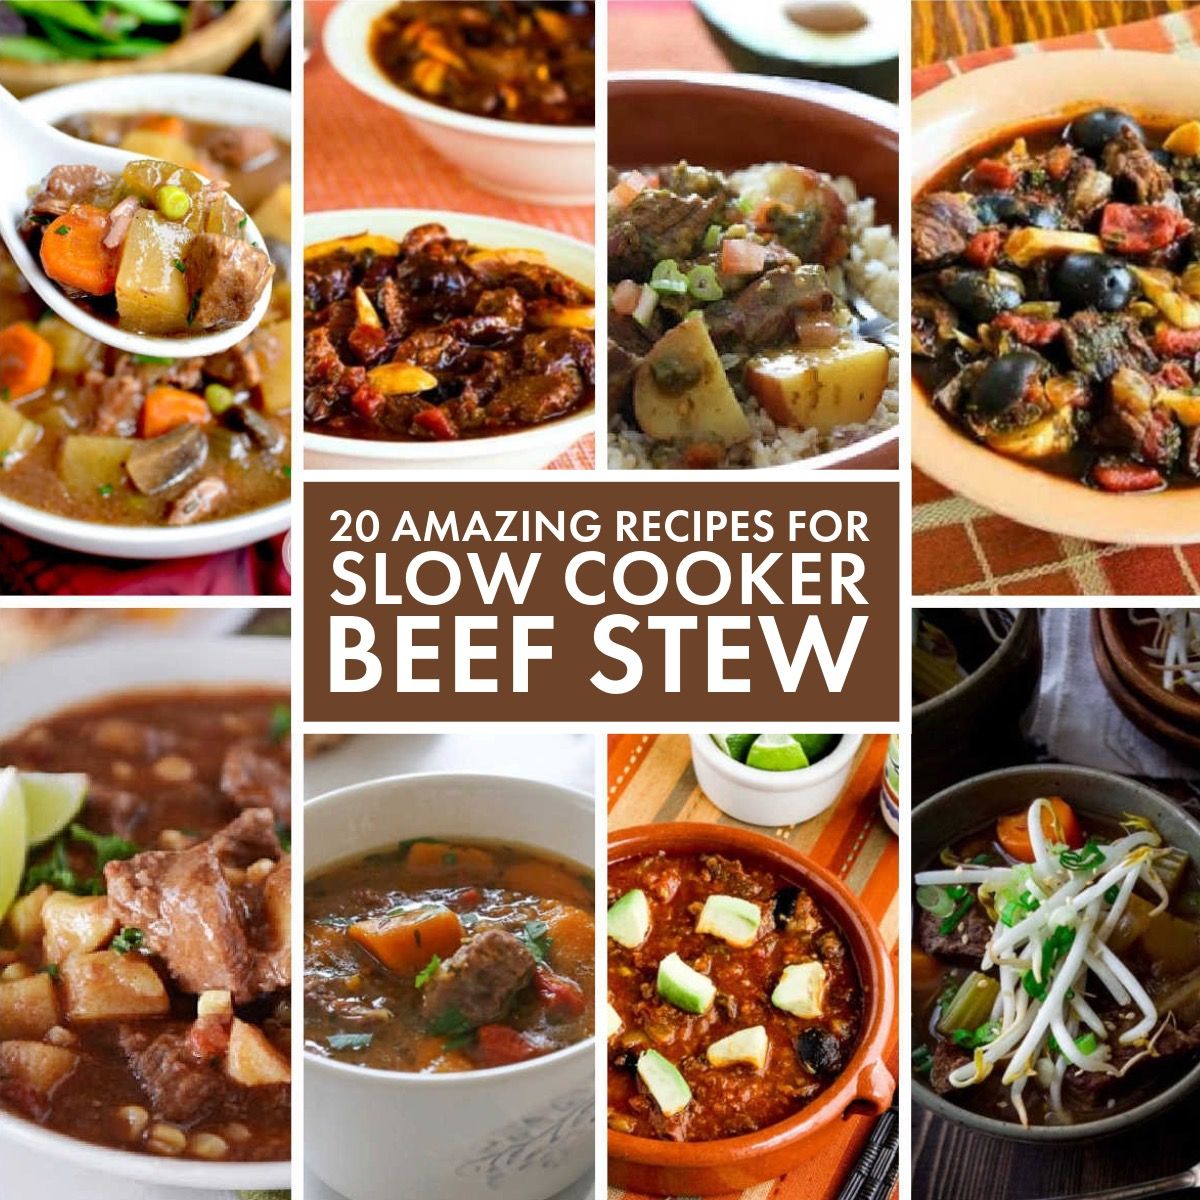 20 Amazing Recipes for Slow Cooker Beef Stew collage of featured recipes with text overlay.